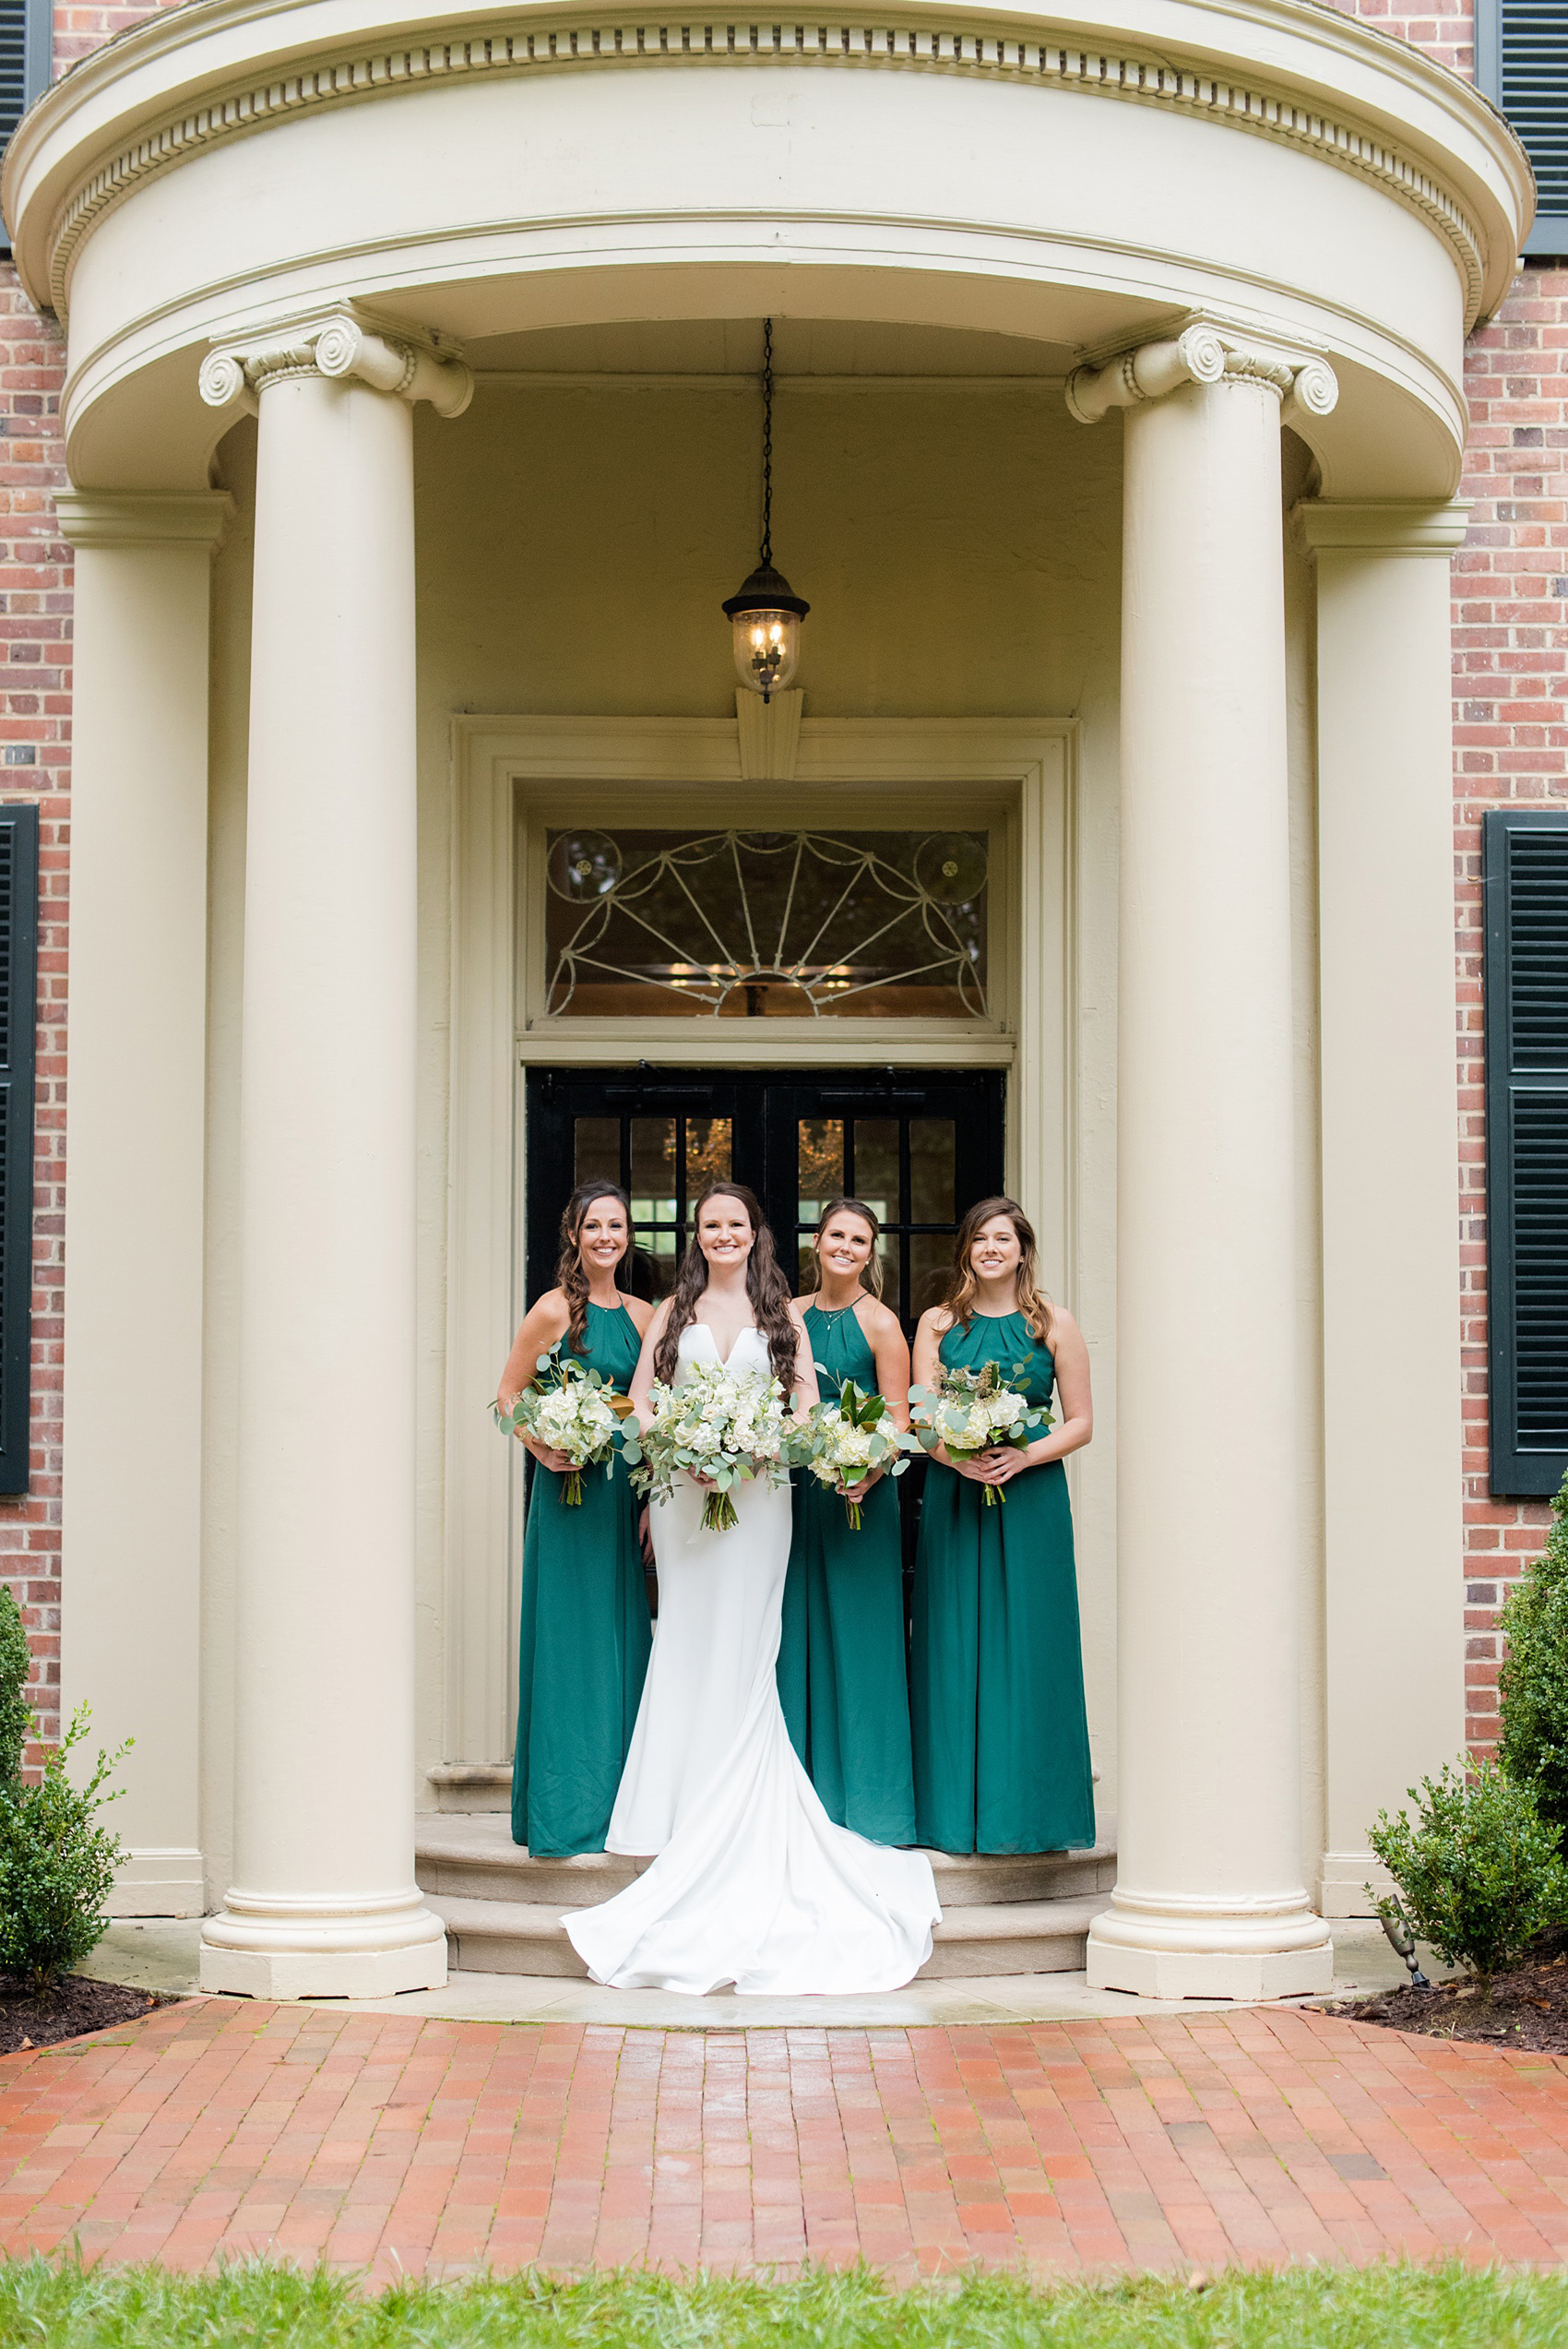 Wedding Party Photos of a fall wedding at The Carolina Inn, in Chapel Hill North Carolina, by Mikkel Paige Photography. This event venue doubles as a hotel for guests, who can enjoy a reception indoors or outdoors. The bridesmaids wore long green gowns and carried white bouquets with eucalyptus greenery. Click through to see inspiration from the entire wedding! Planner: @asouthernsoiree, Flowers by The Flower Cupboard #thecarolinainn #ChapelHillWeddings #MikkelPaige #ASouthernSoiree #greenbridesmaids #greenwedding #bridalparty